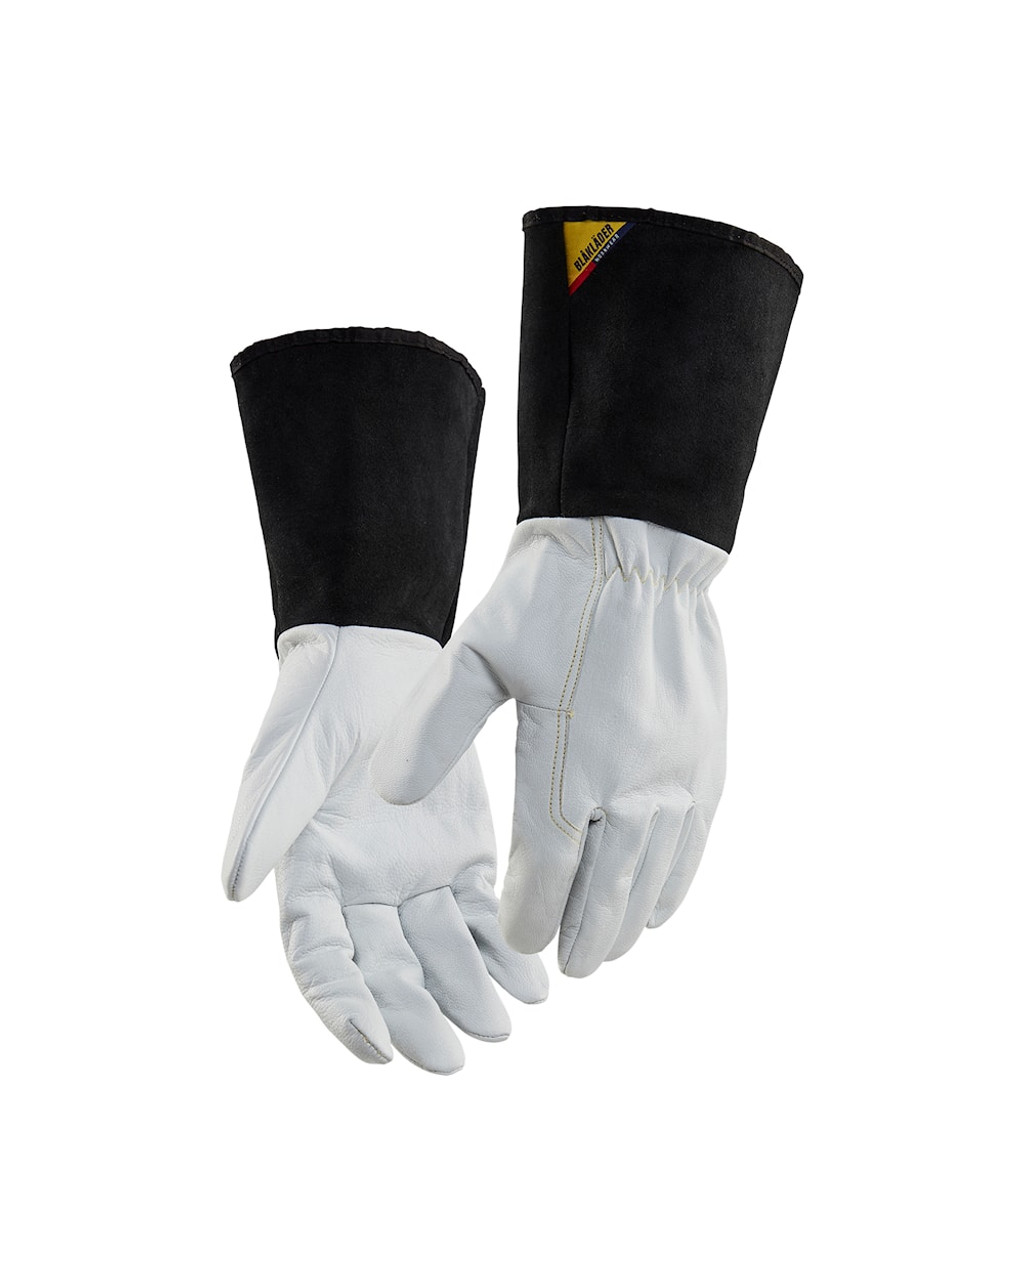 BLAKLADER Gloves | 2839 Welding Gloves with Extended Cuff in Leather